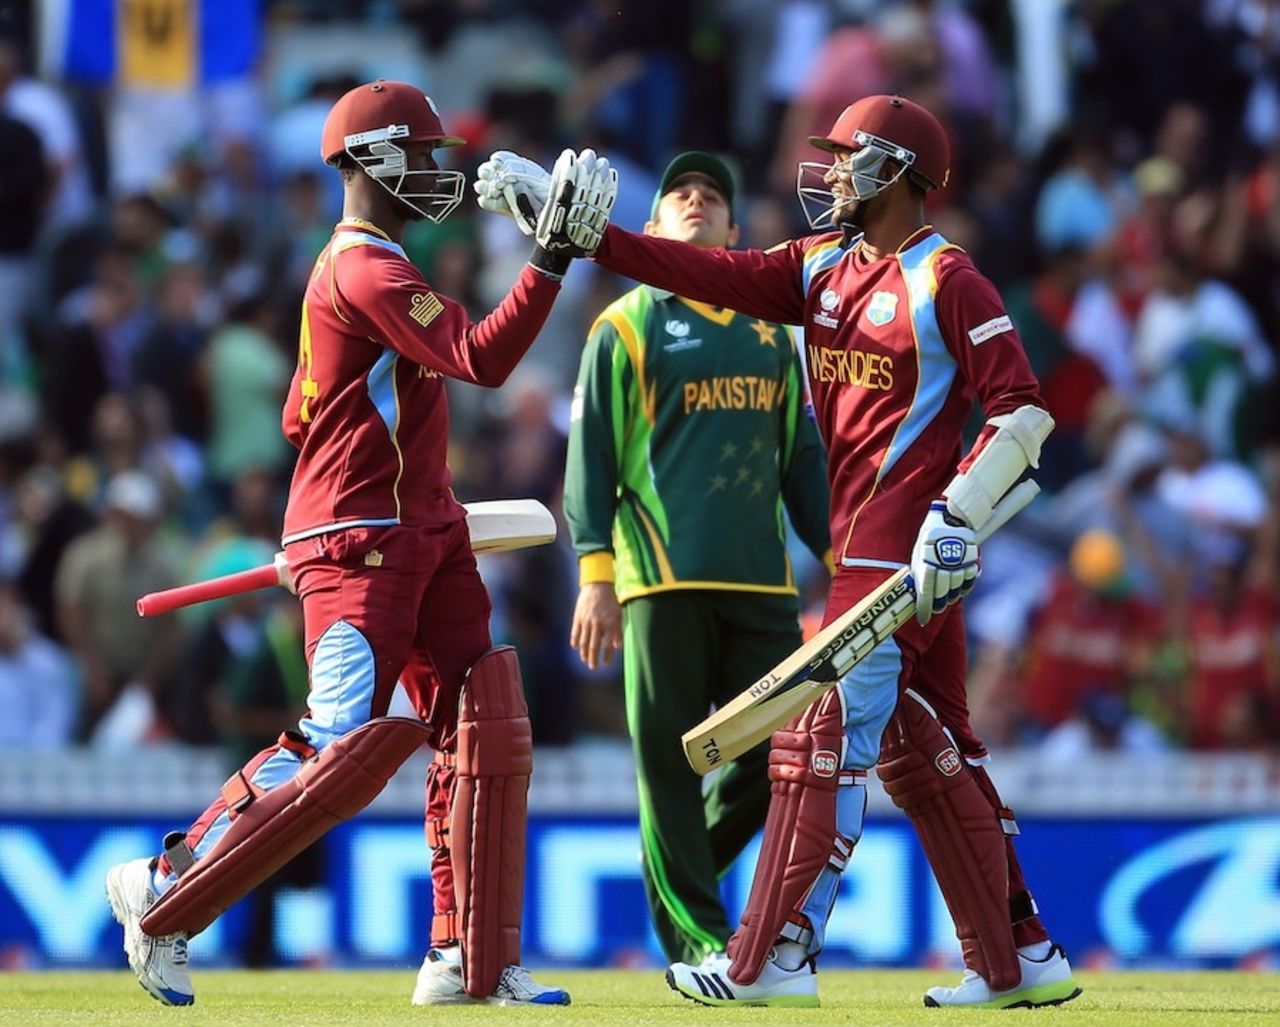 Denesh Ramdin and Kemar Roach celebrate a tense win, West Indies v Pakistan, Champions Trophy, Group B, The Oval, June 7, 2013